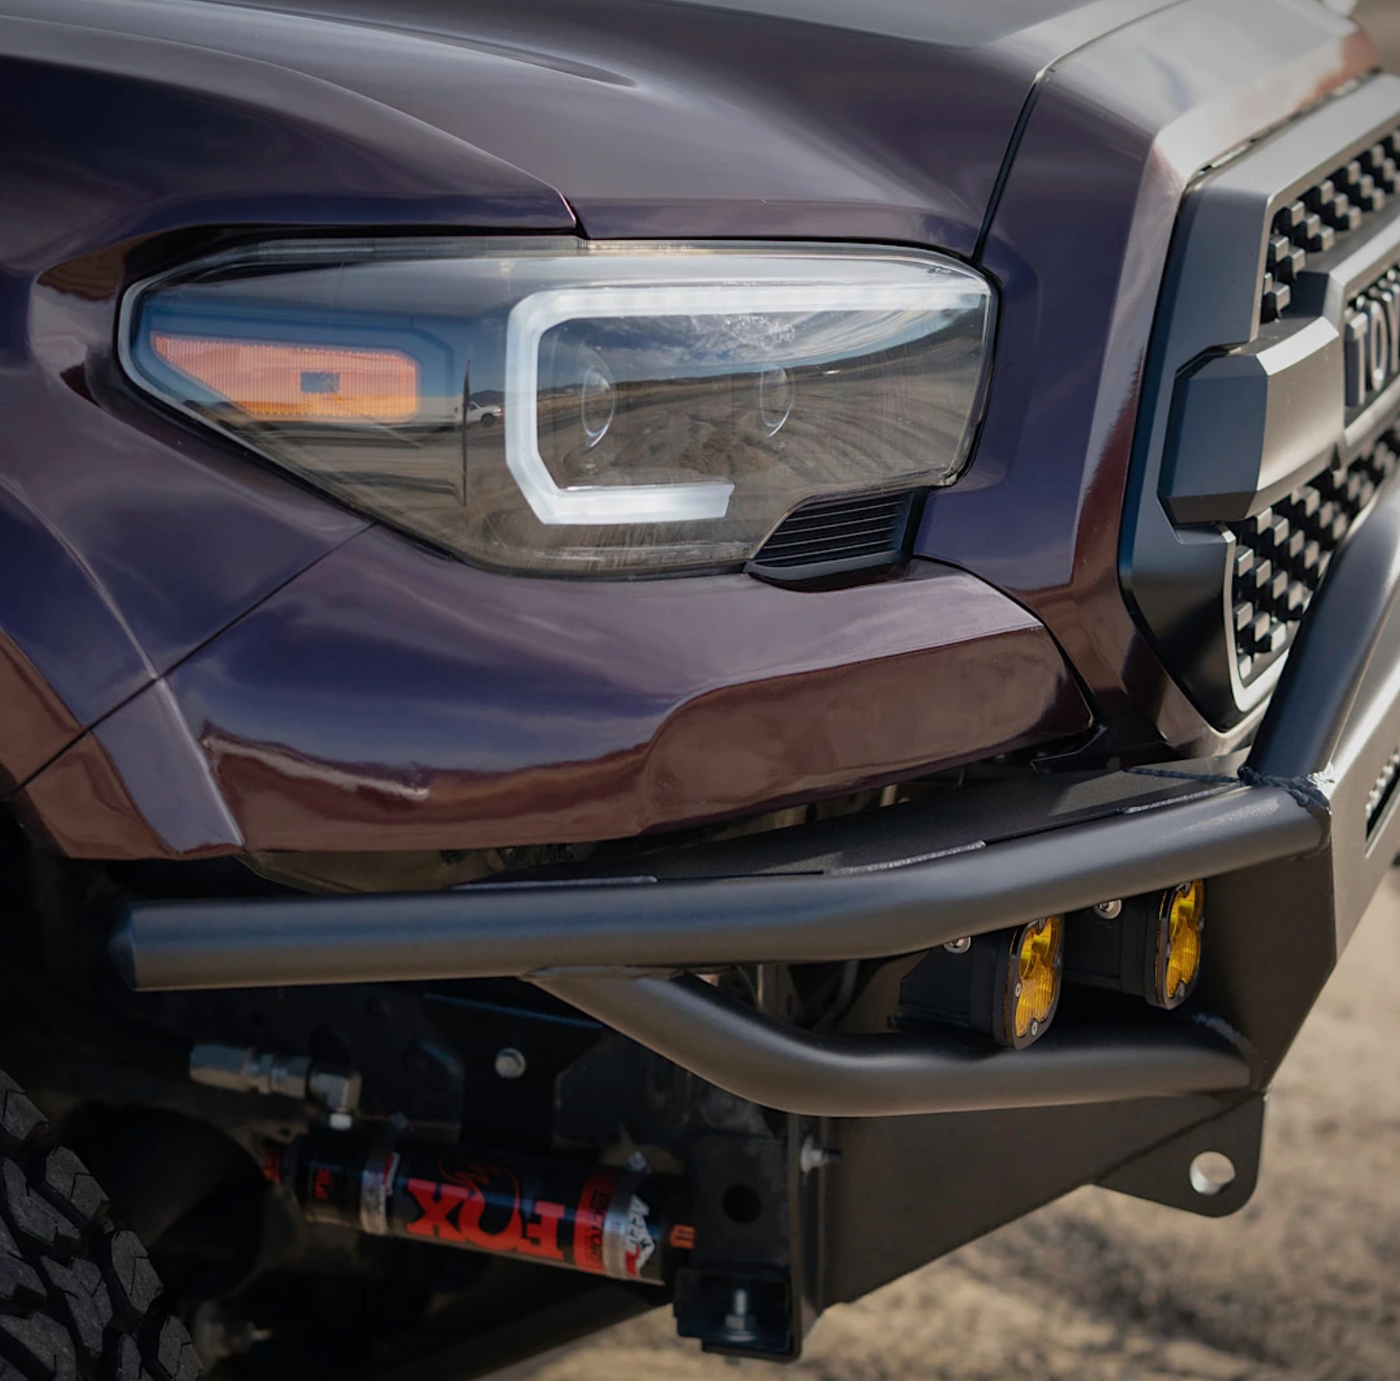 C4 Fabrication's 2016+ Tacoma Hybrid Front Bumper with Mid Height Bull Bar